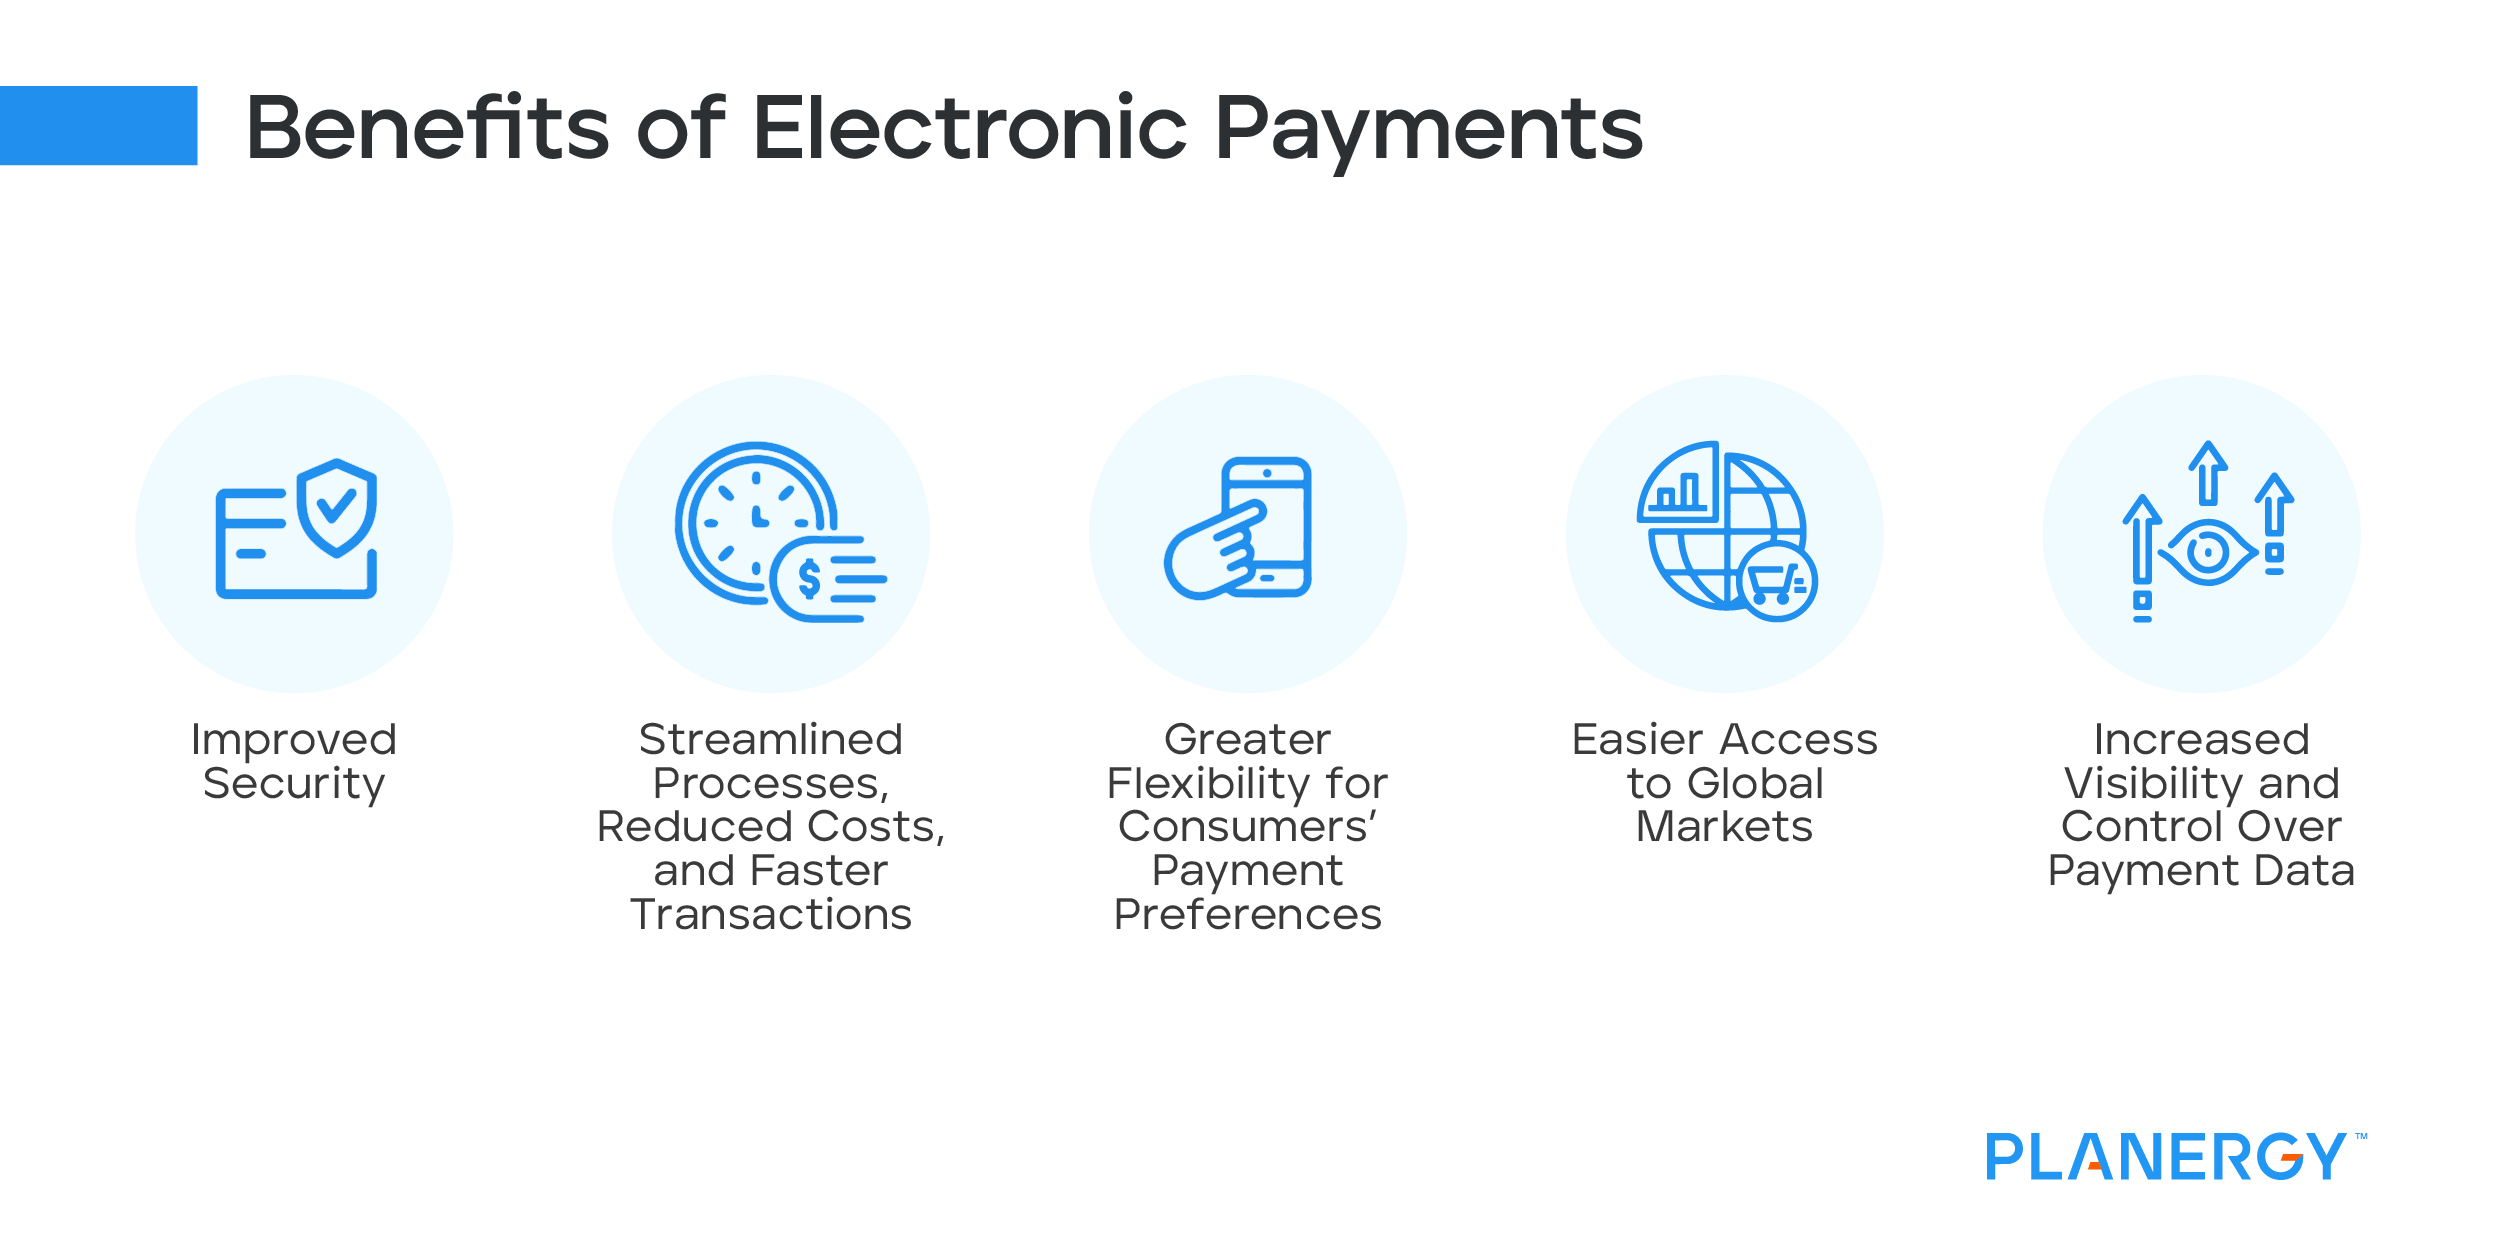 Benefits of Electronic Payments